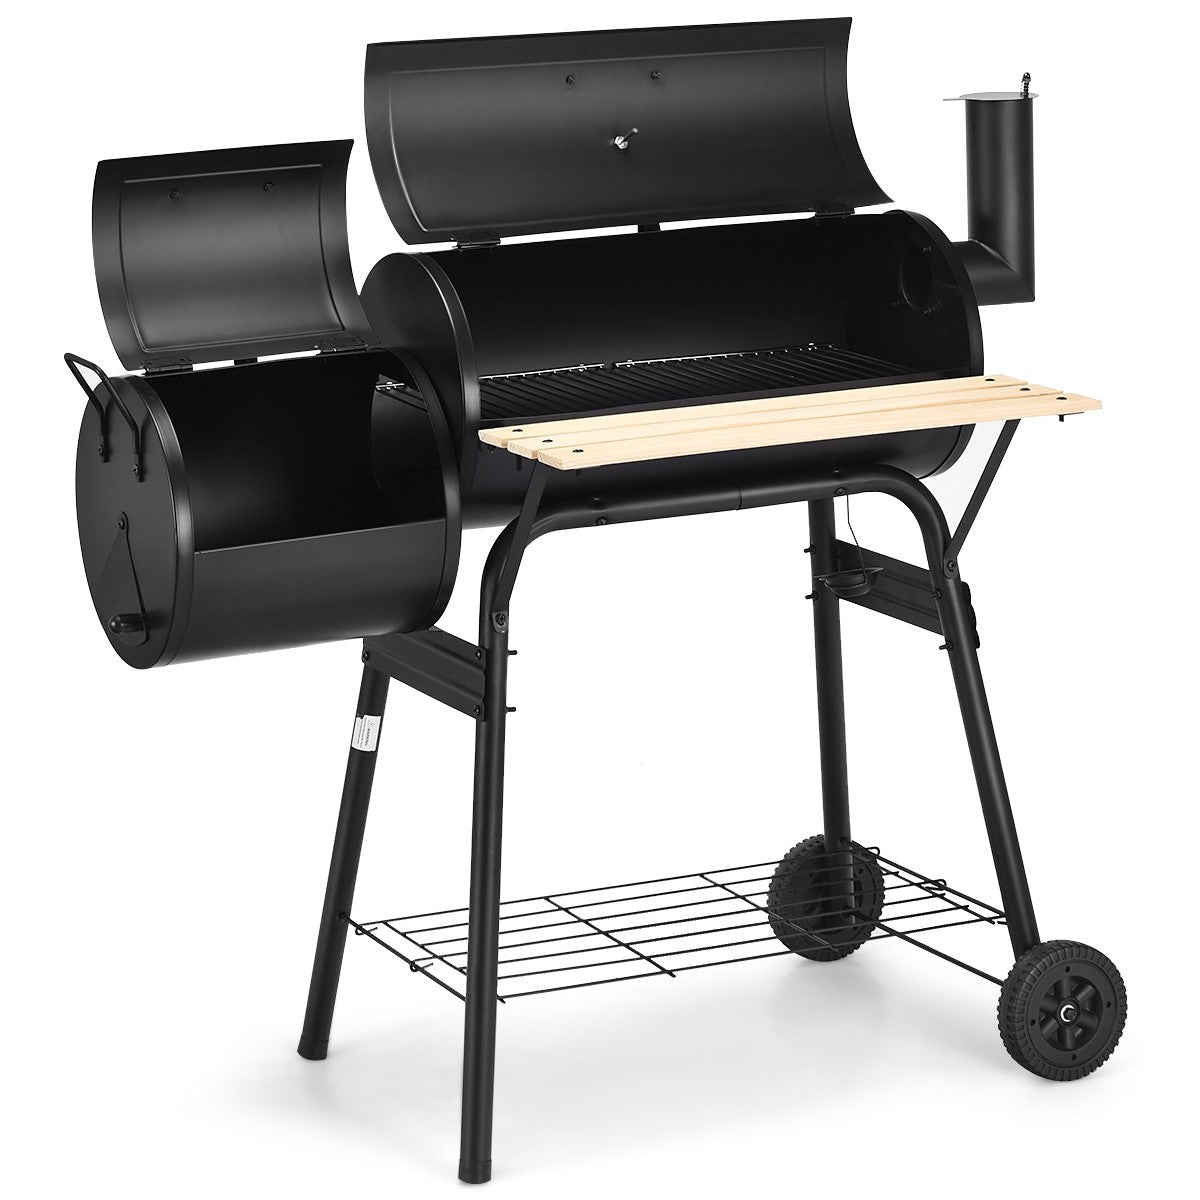 BBQ Charcoal Grill with Offset Smoker - Giantexus